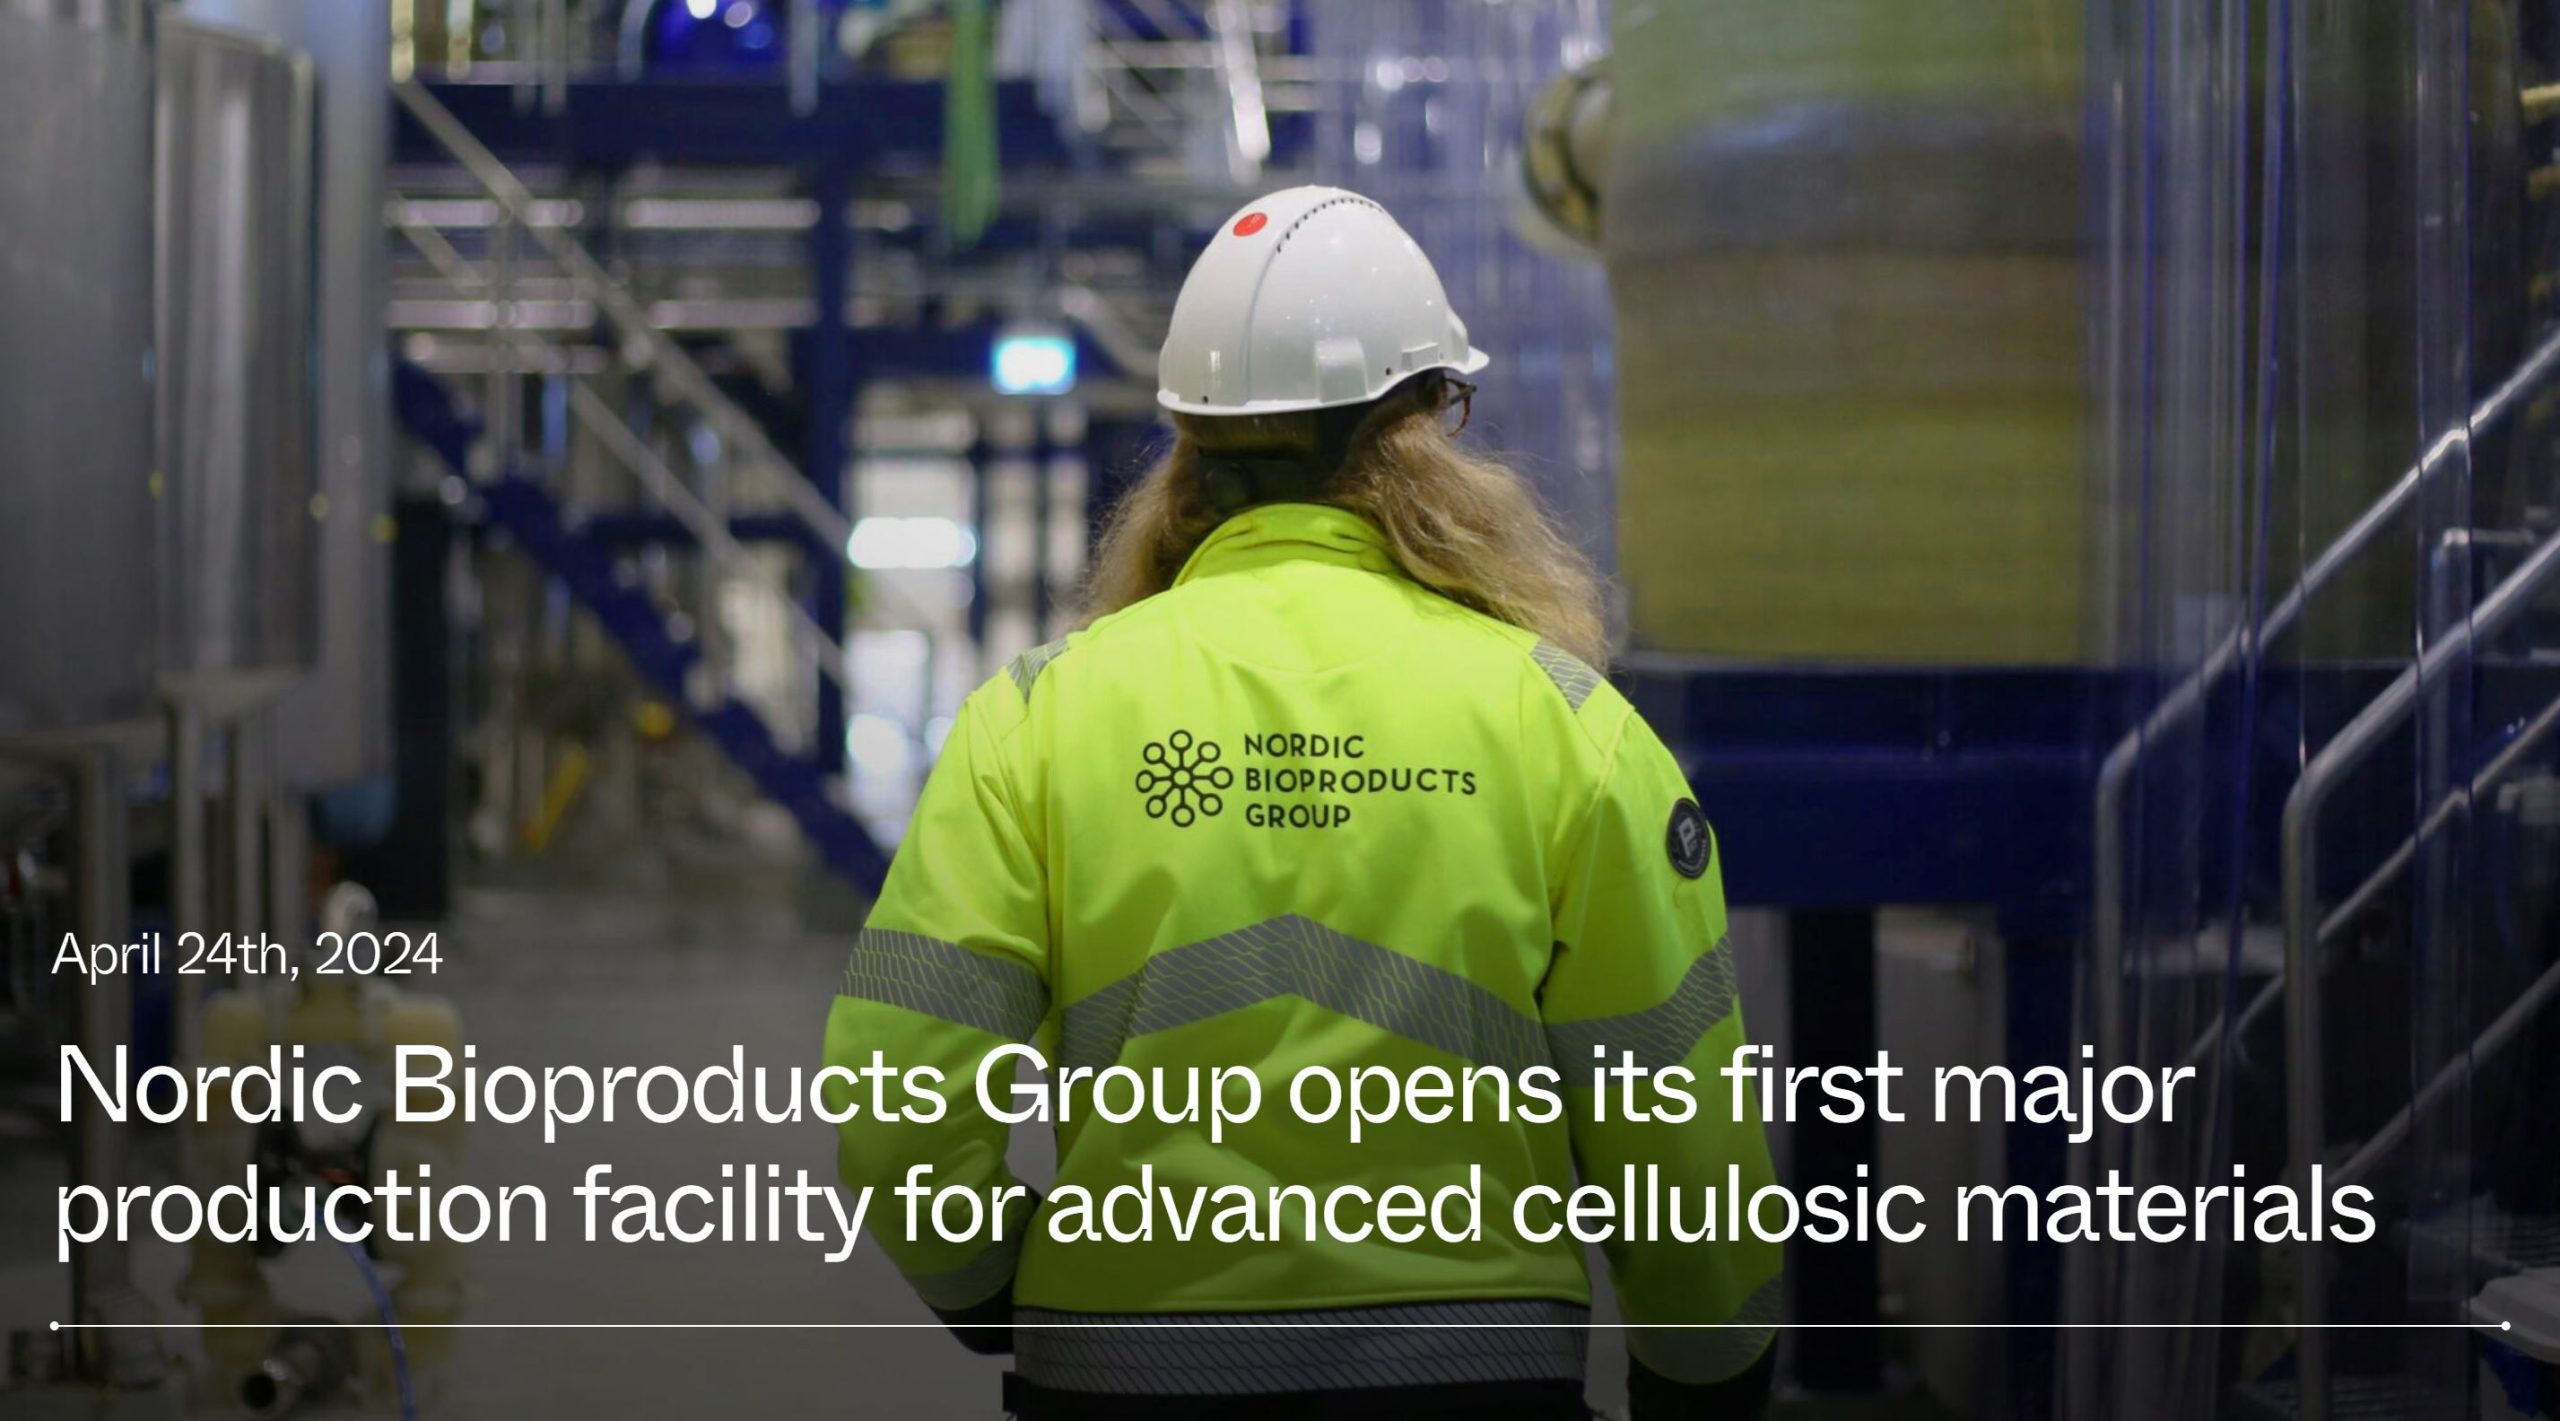 Nordic Bioproducts Group opens its first major production facility for advanced cellulosic materials